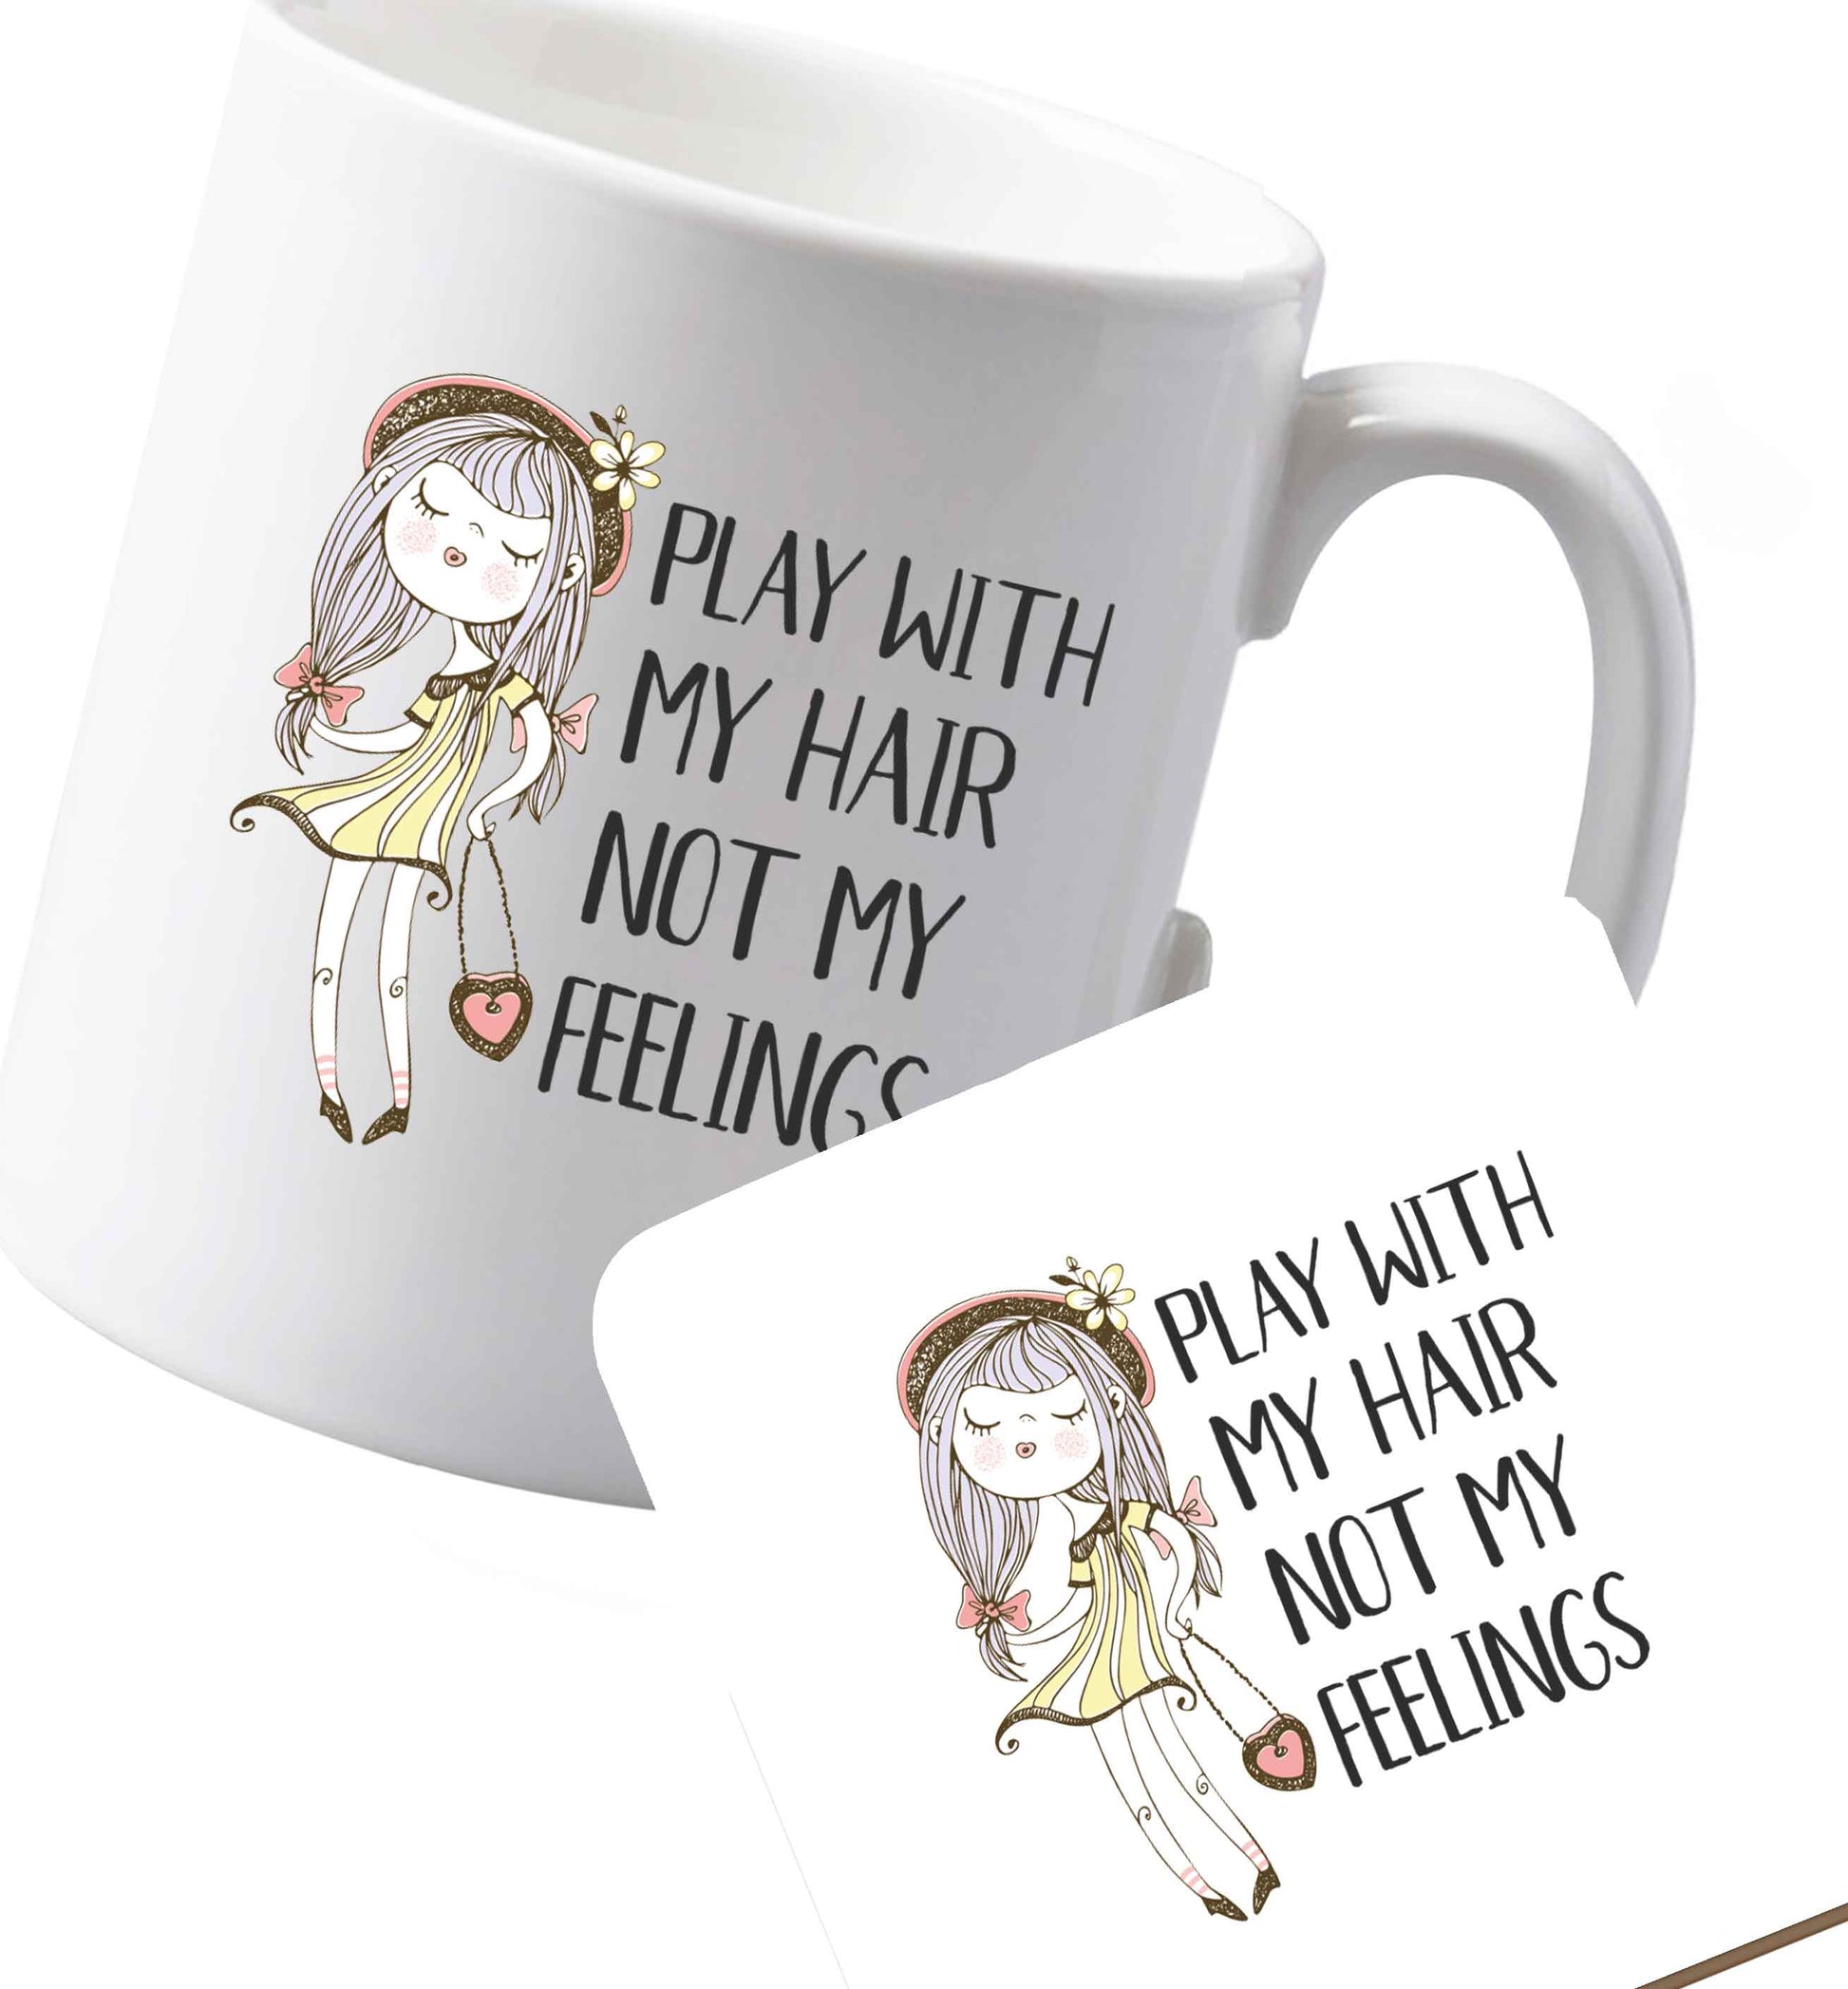 10 oz Ceramic mug and coaster Play with my hair not my feelings illustration  both sides